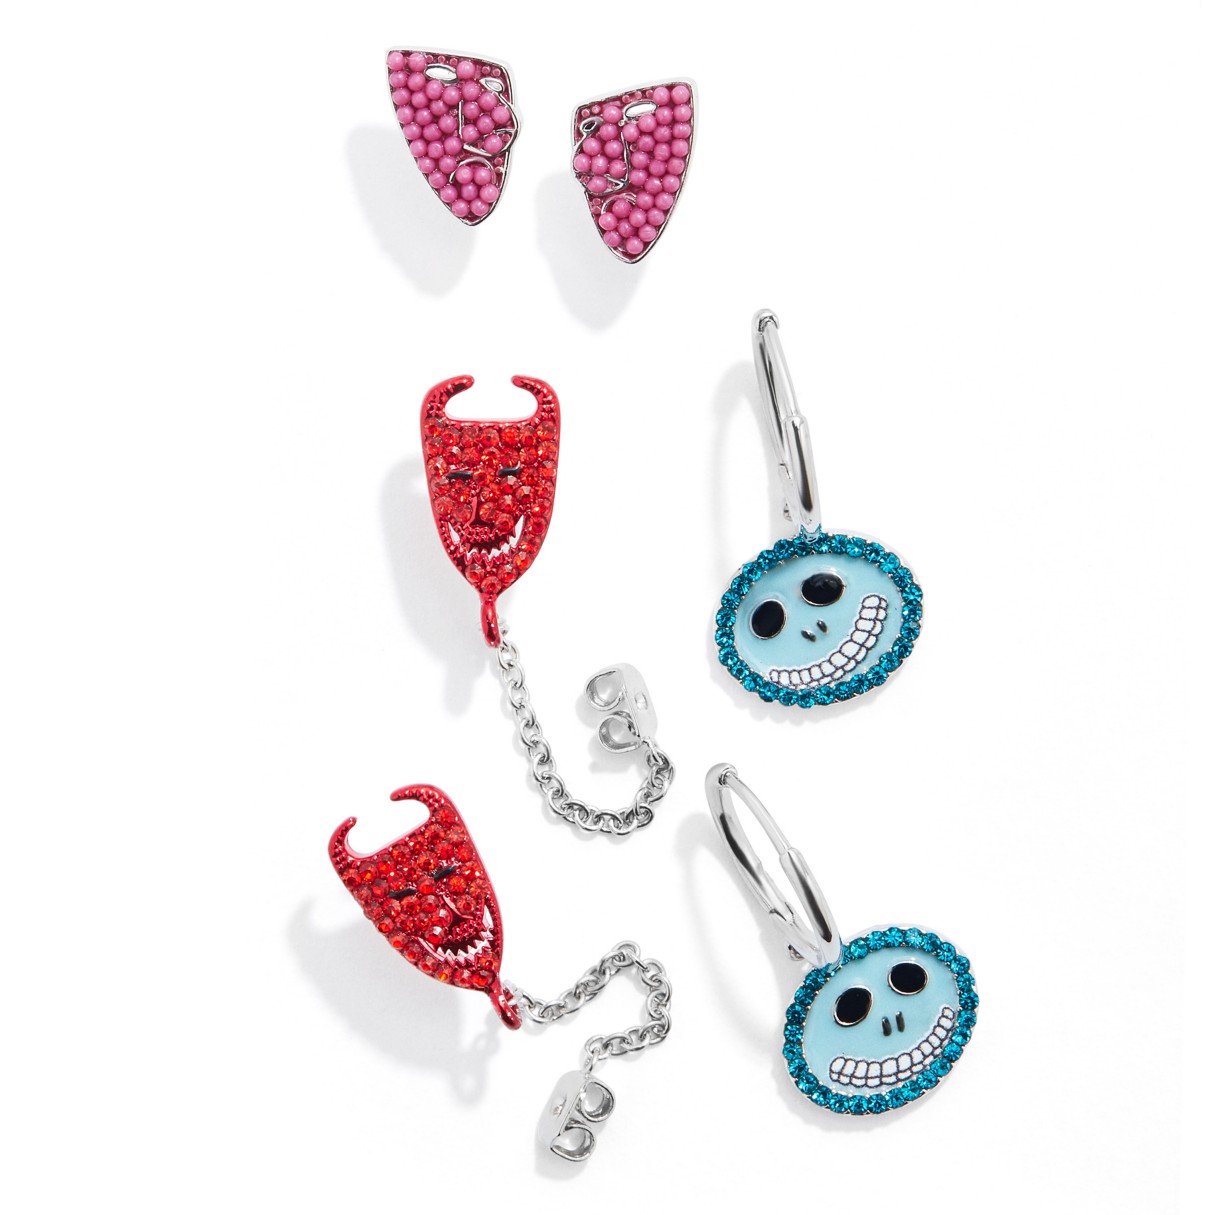 Lock, Shock and Barrel Earring Set by BaubleBar – The Nightmare Before Christmas